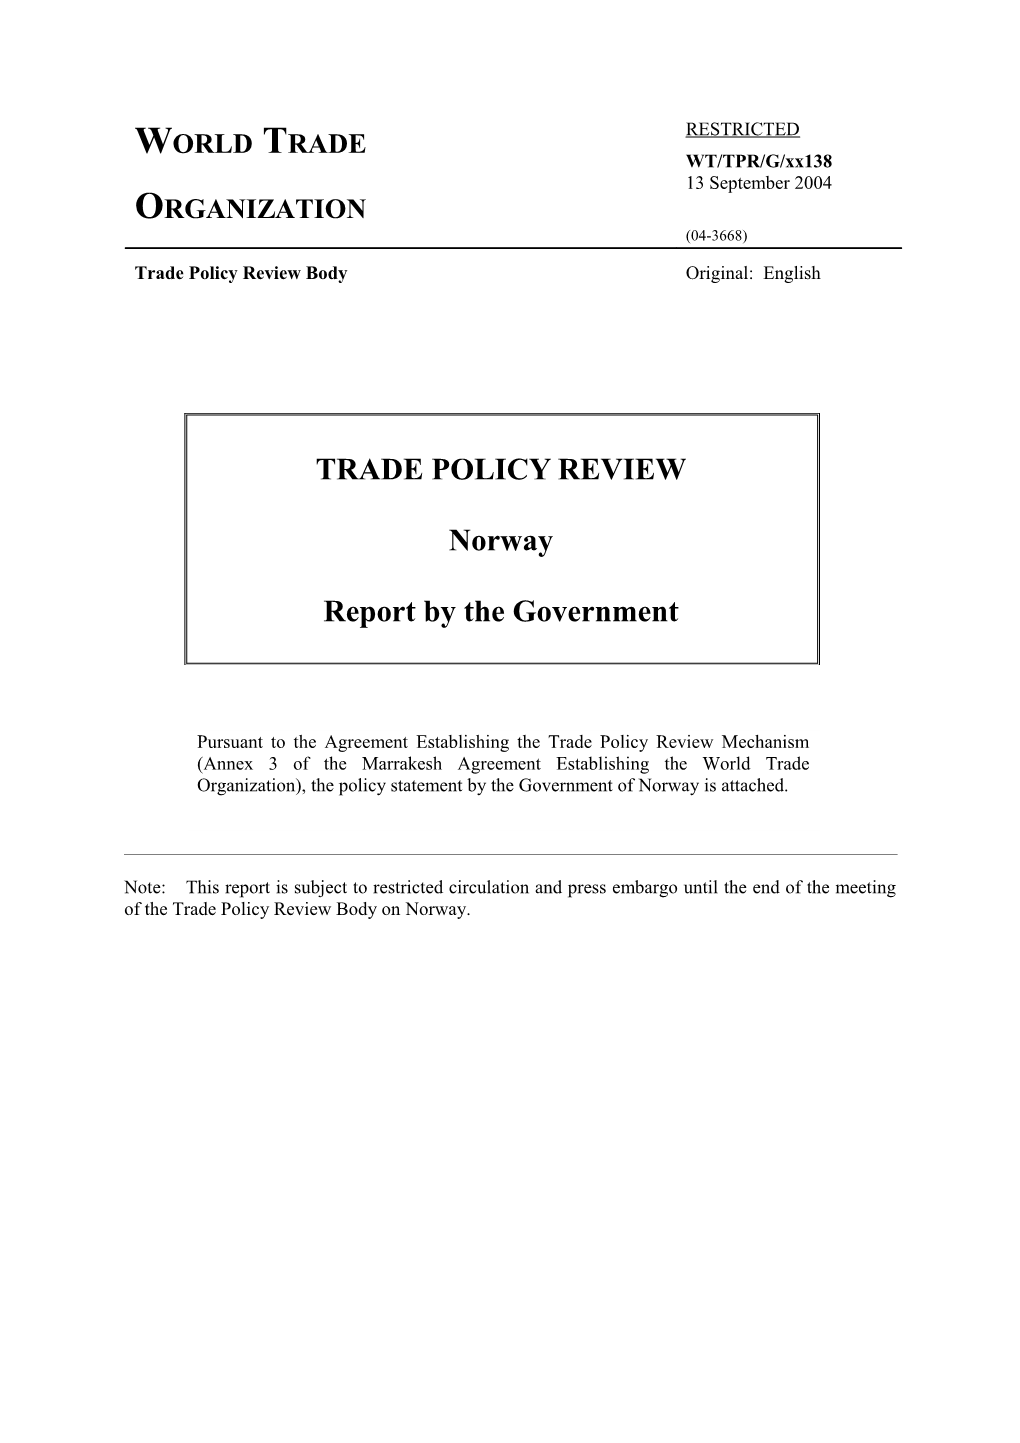 I.Introduction: Trade and Economic Policy5